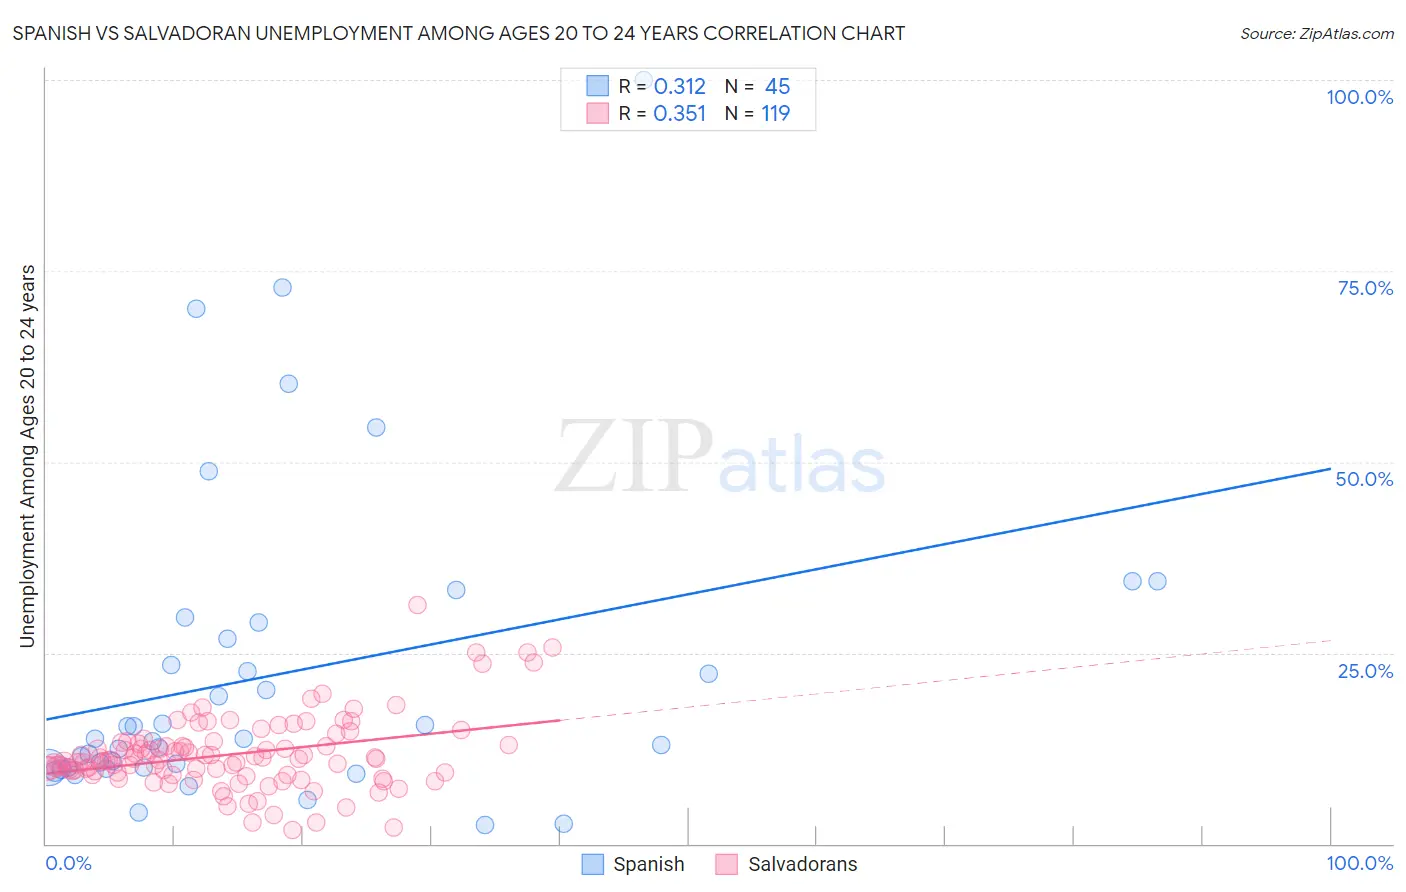 Spanish vs Salvadoran Unemployment Among Ages 20 to 24 years